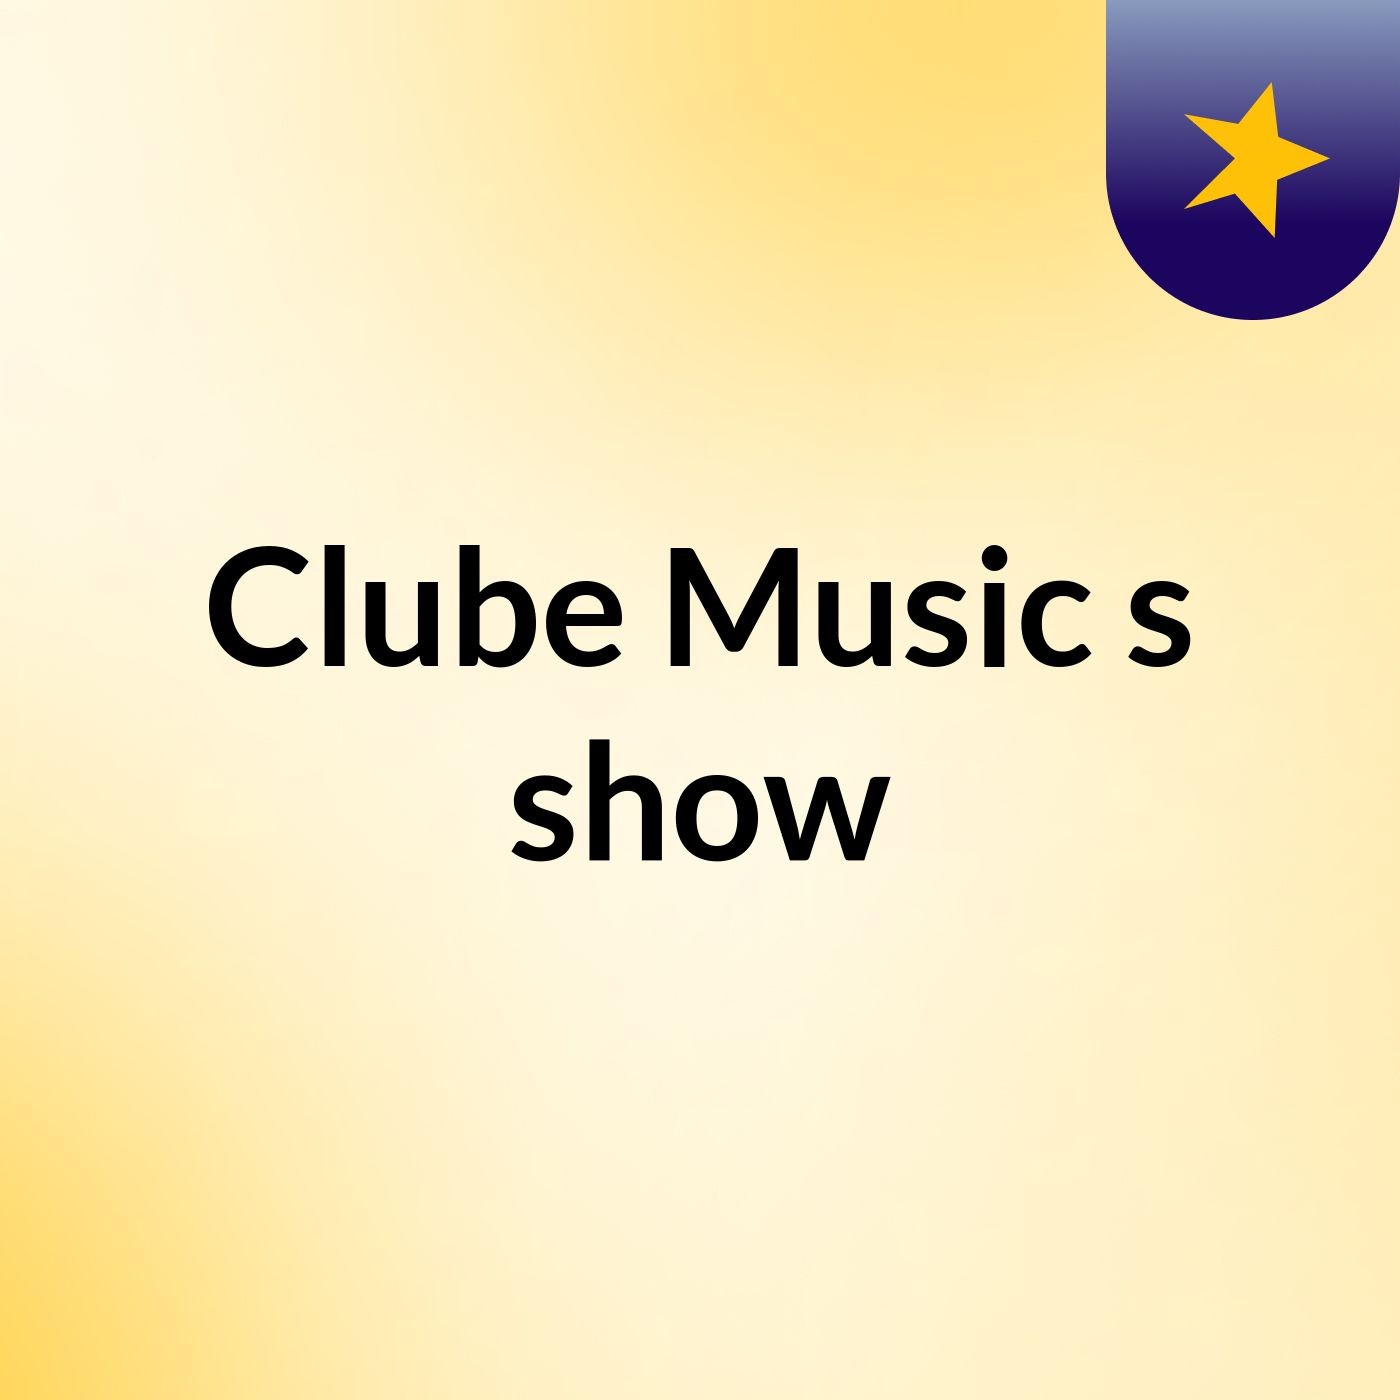 Clube Music's show